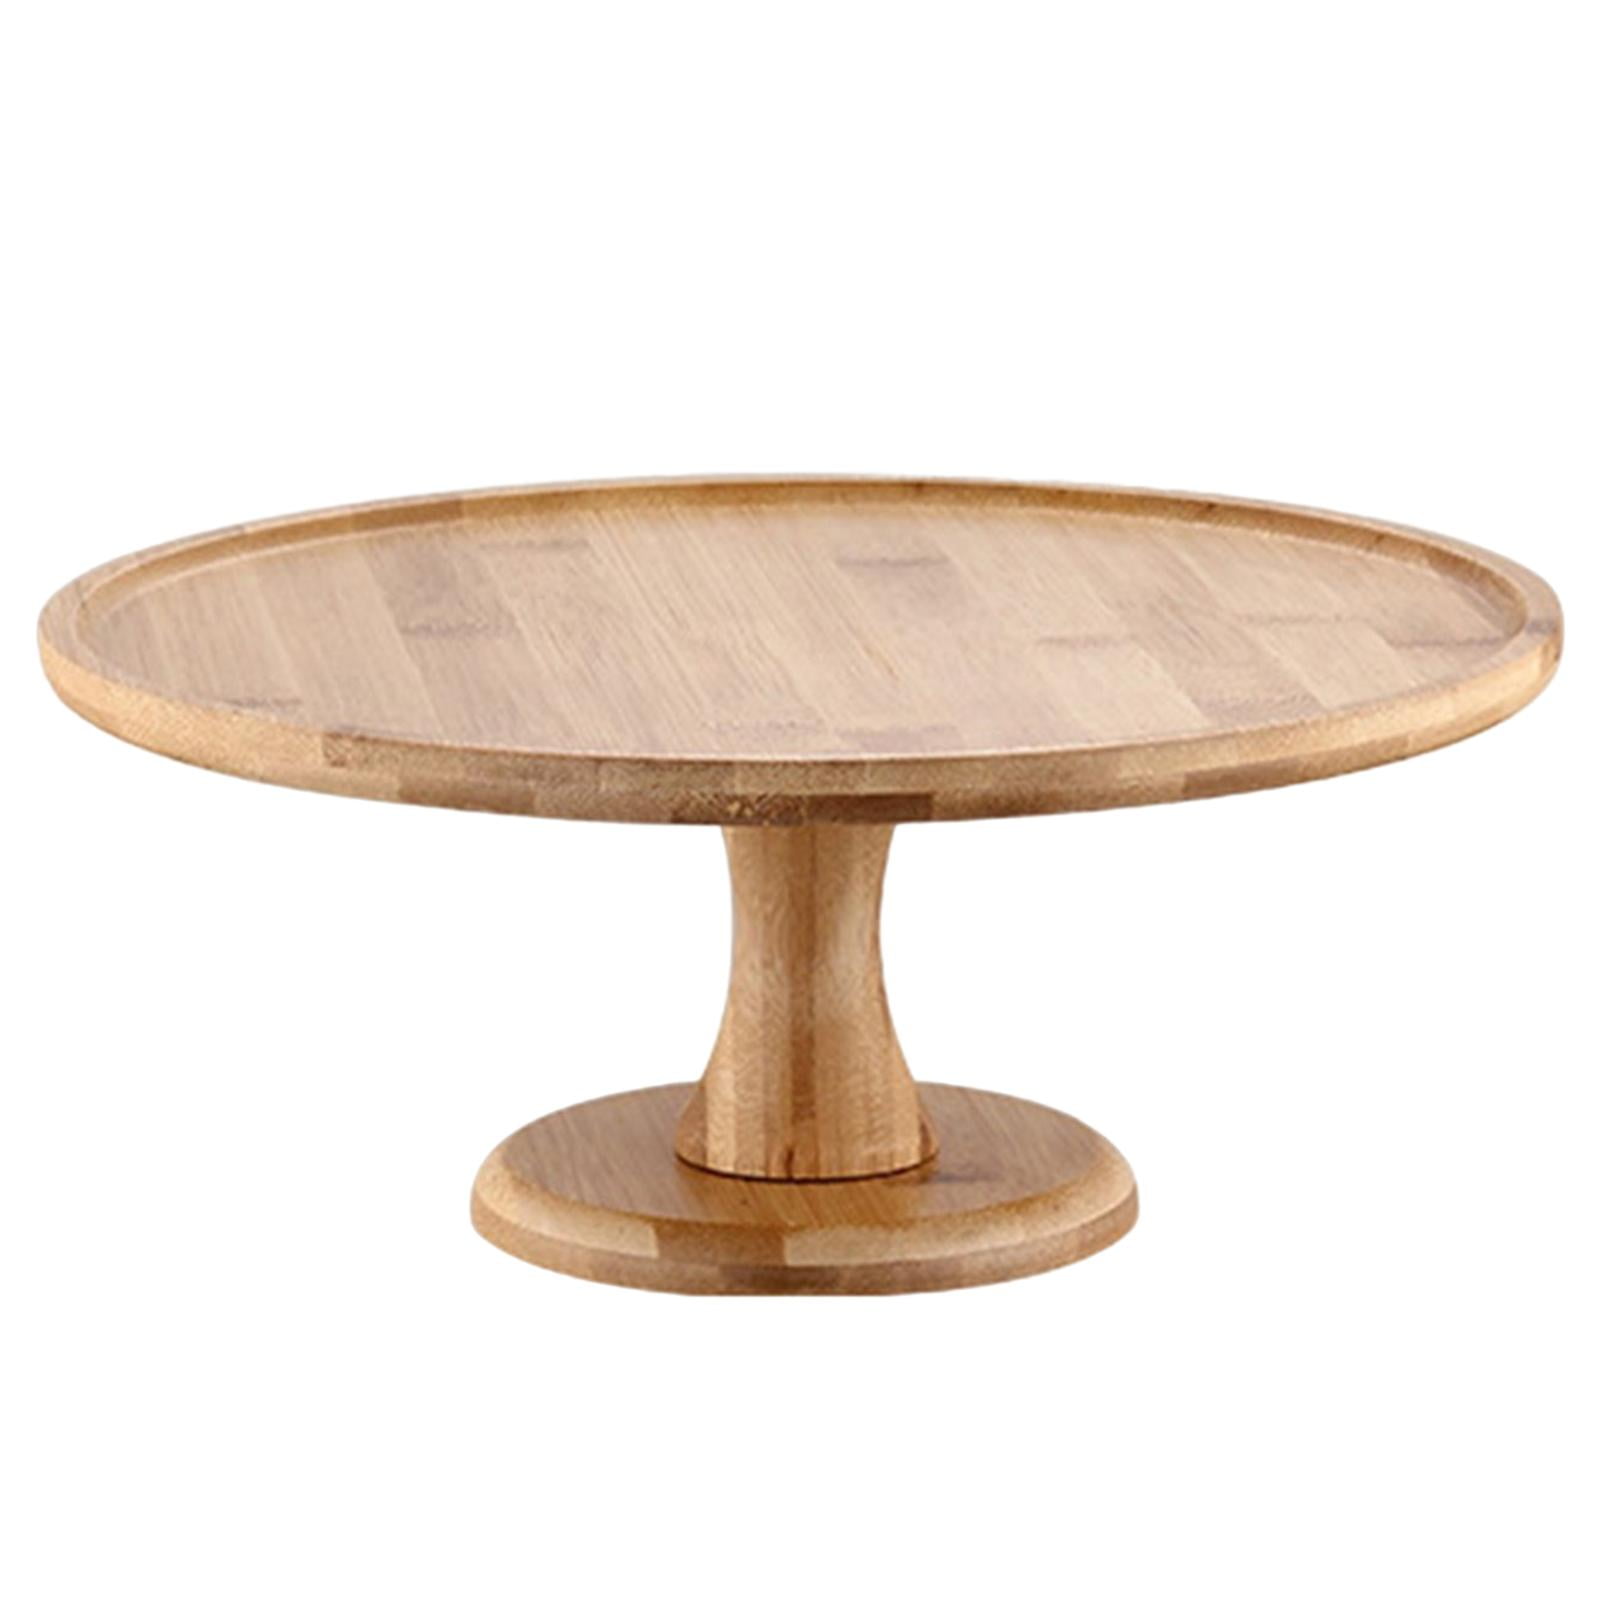 Details about   Natural Geo Multicolored Onyx Cake Stand 